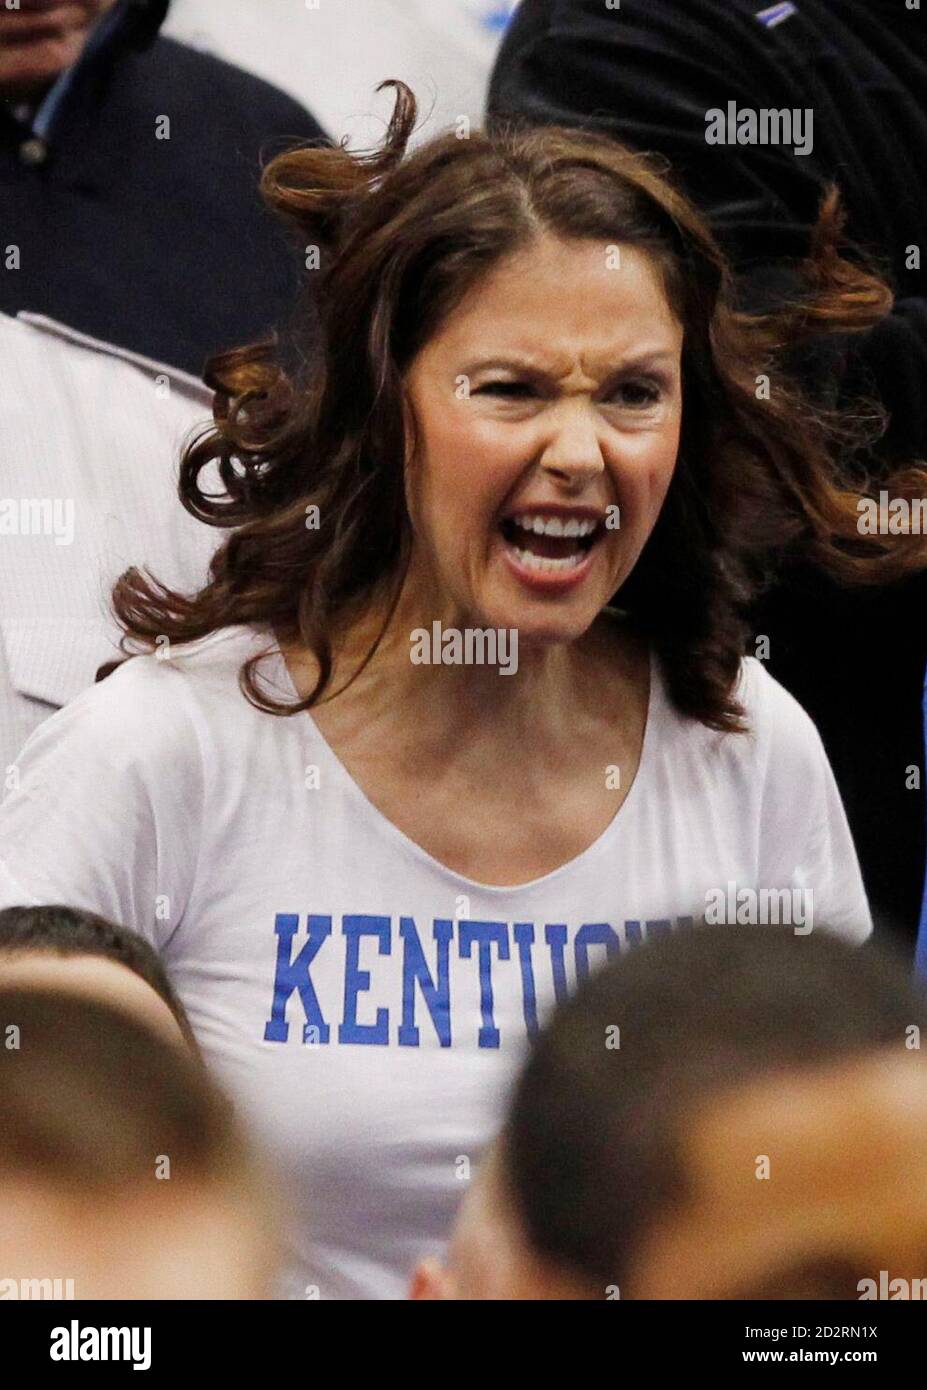 actress-ashley-judd-is-seen-in-the-stands-while-kentucky-and-west-virginia-play-in-their-ncaa-east-regional-college-basketball-game-in-syracuse-new-york-march-27-2010-reutersmike-segar-united-states-tags-sport-basketball-entertainment-2D2RN1X.jpg